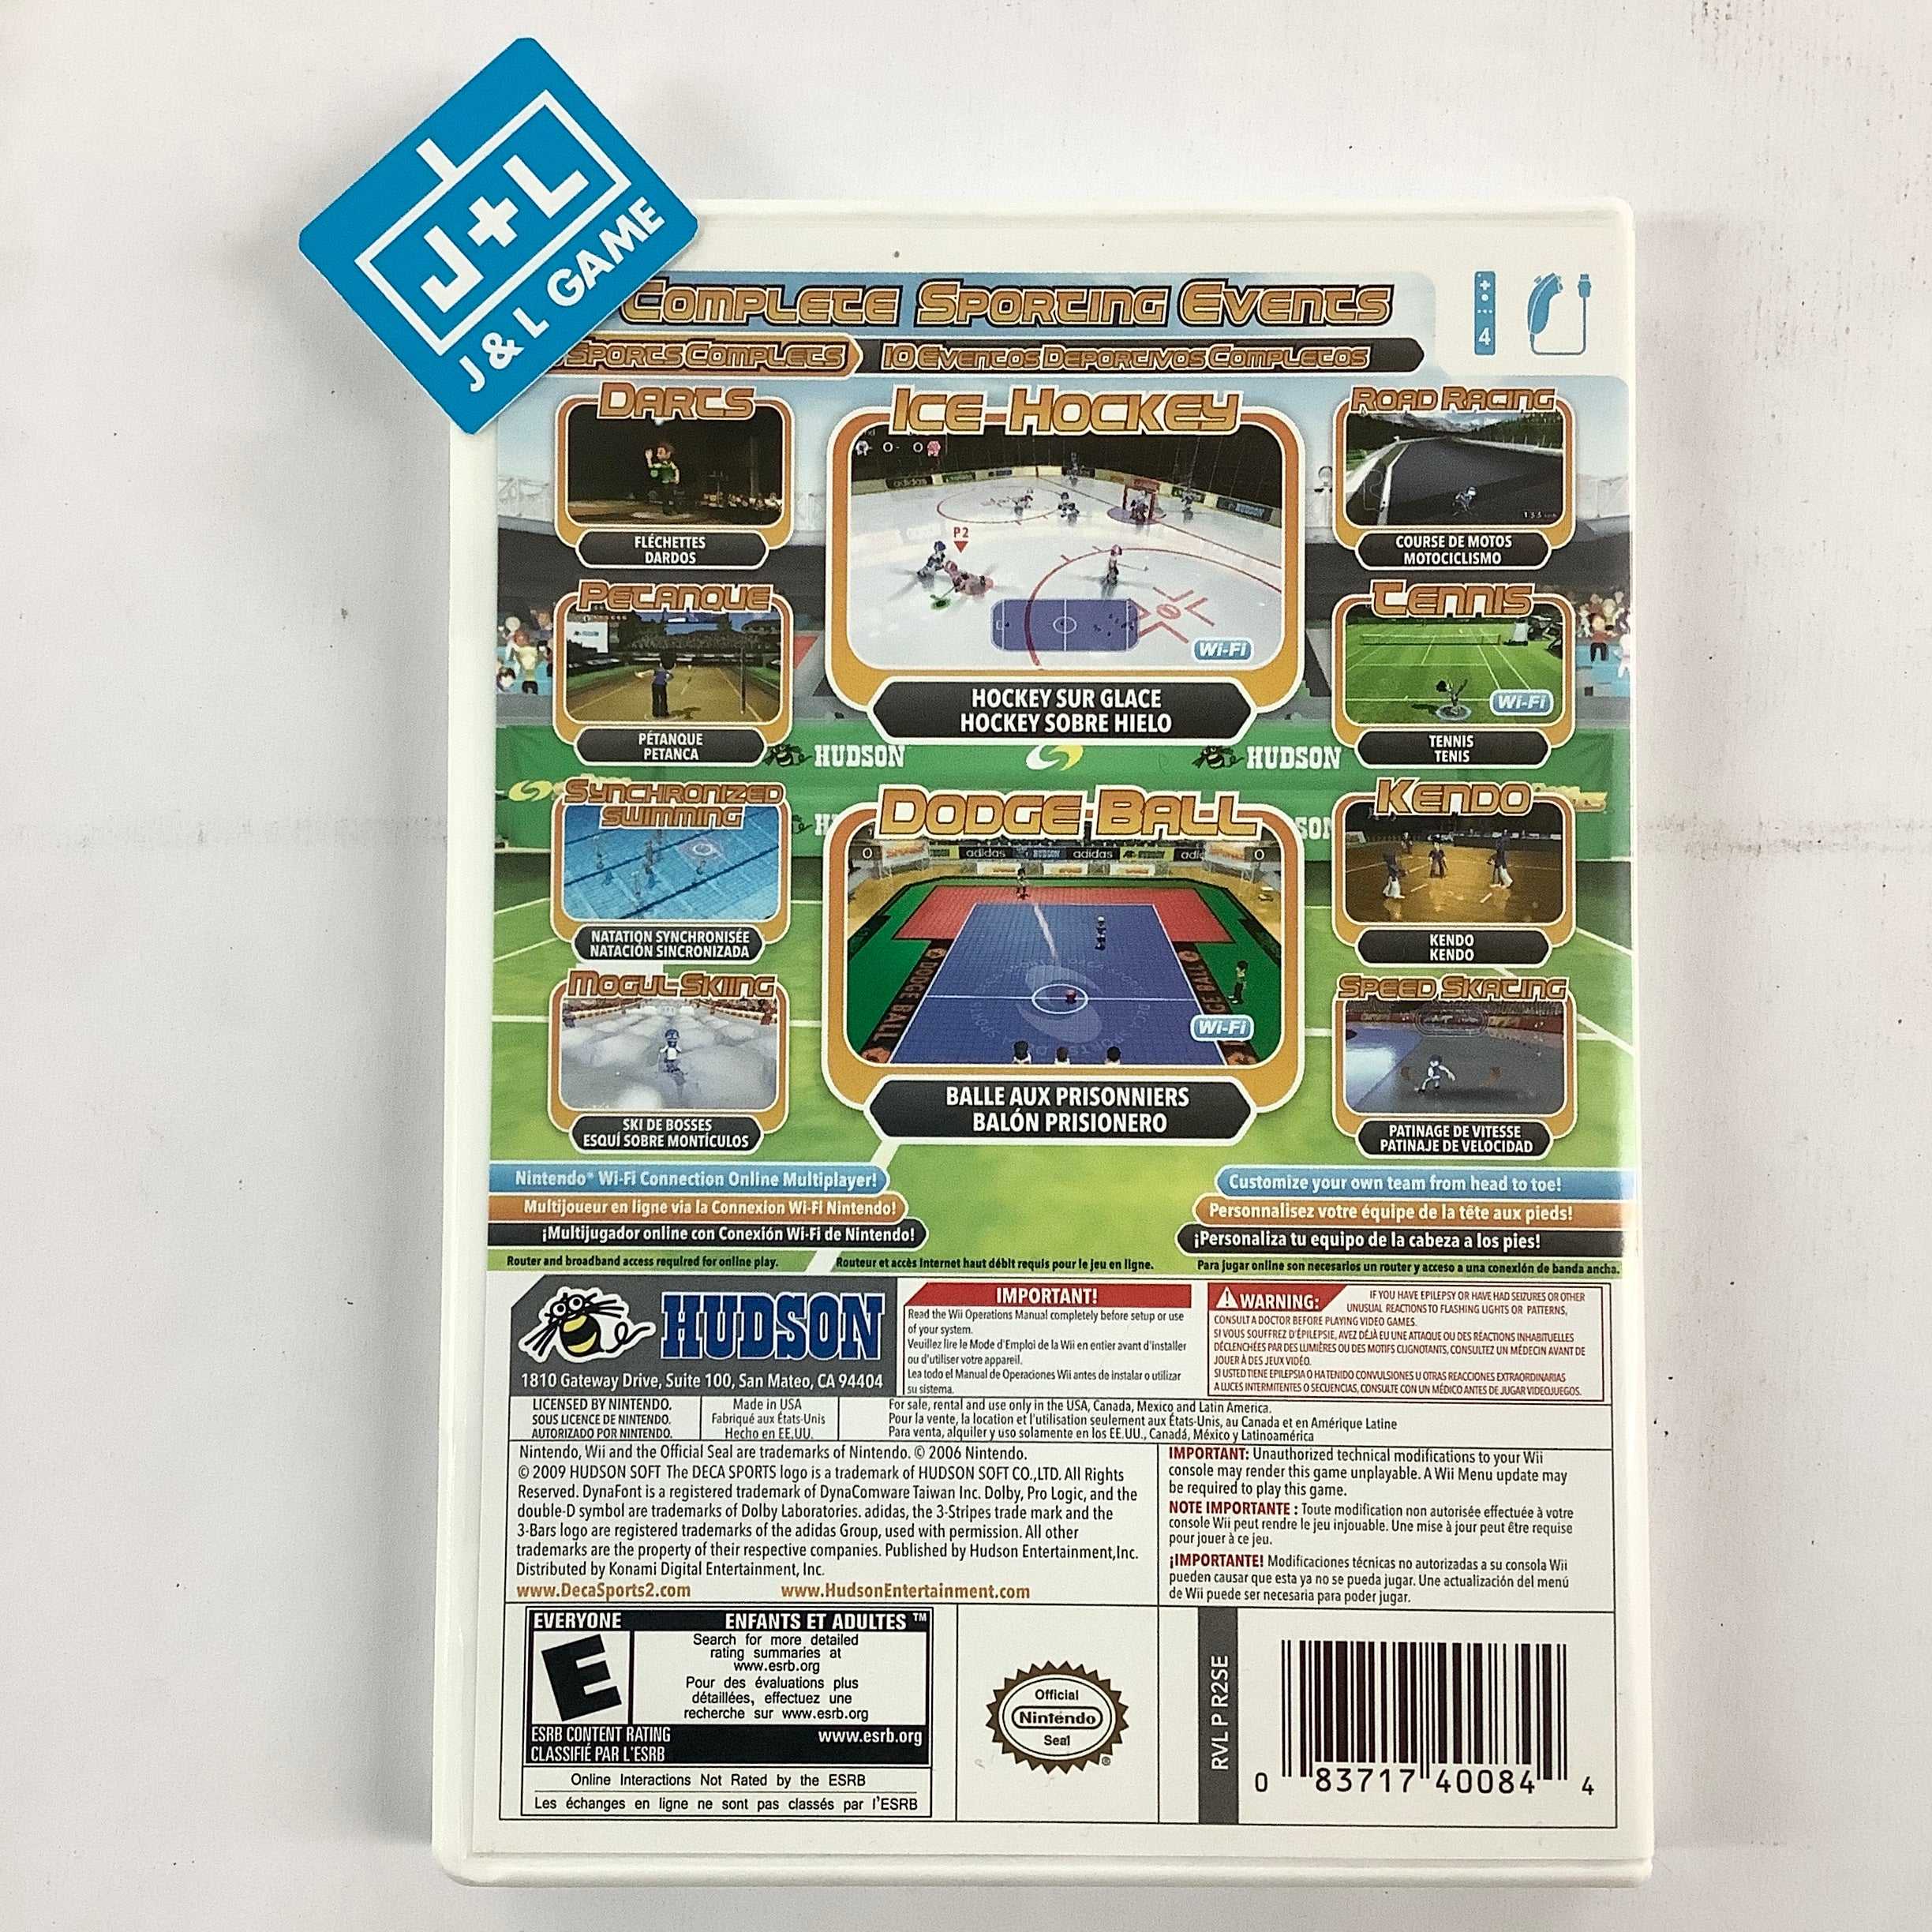 Deca Sports 2 - Nintendo Wii [Pre-Owned] Video Games Hudson   